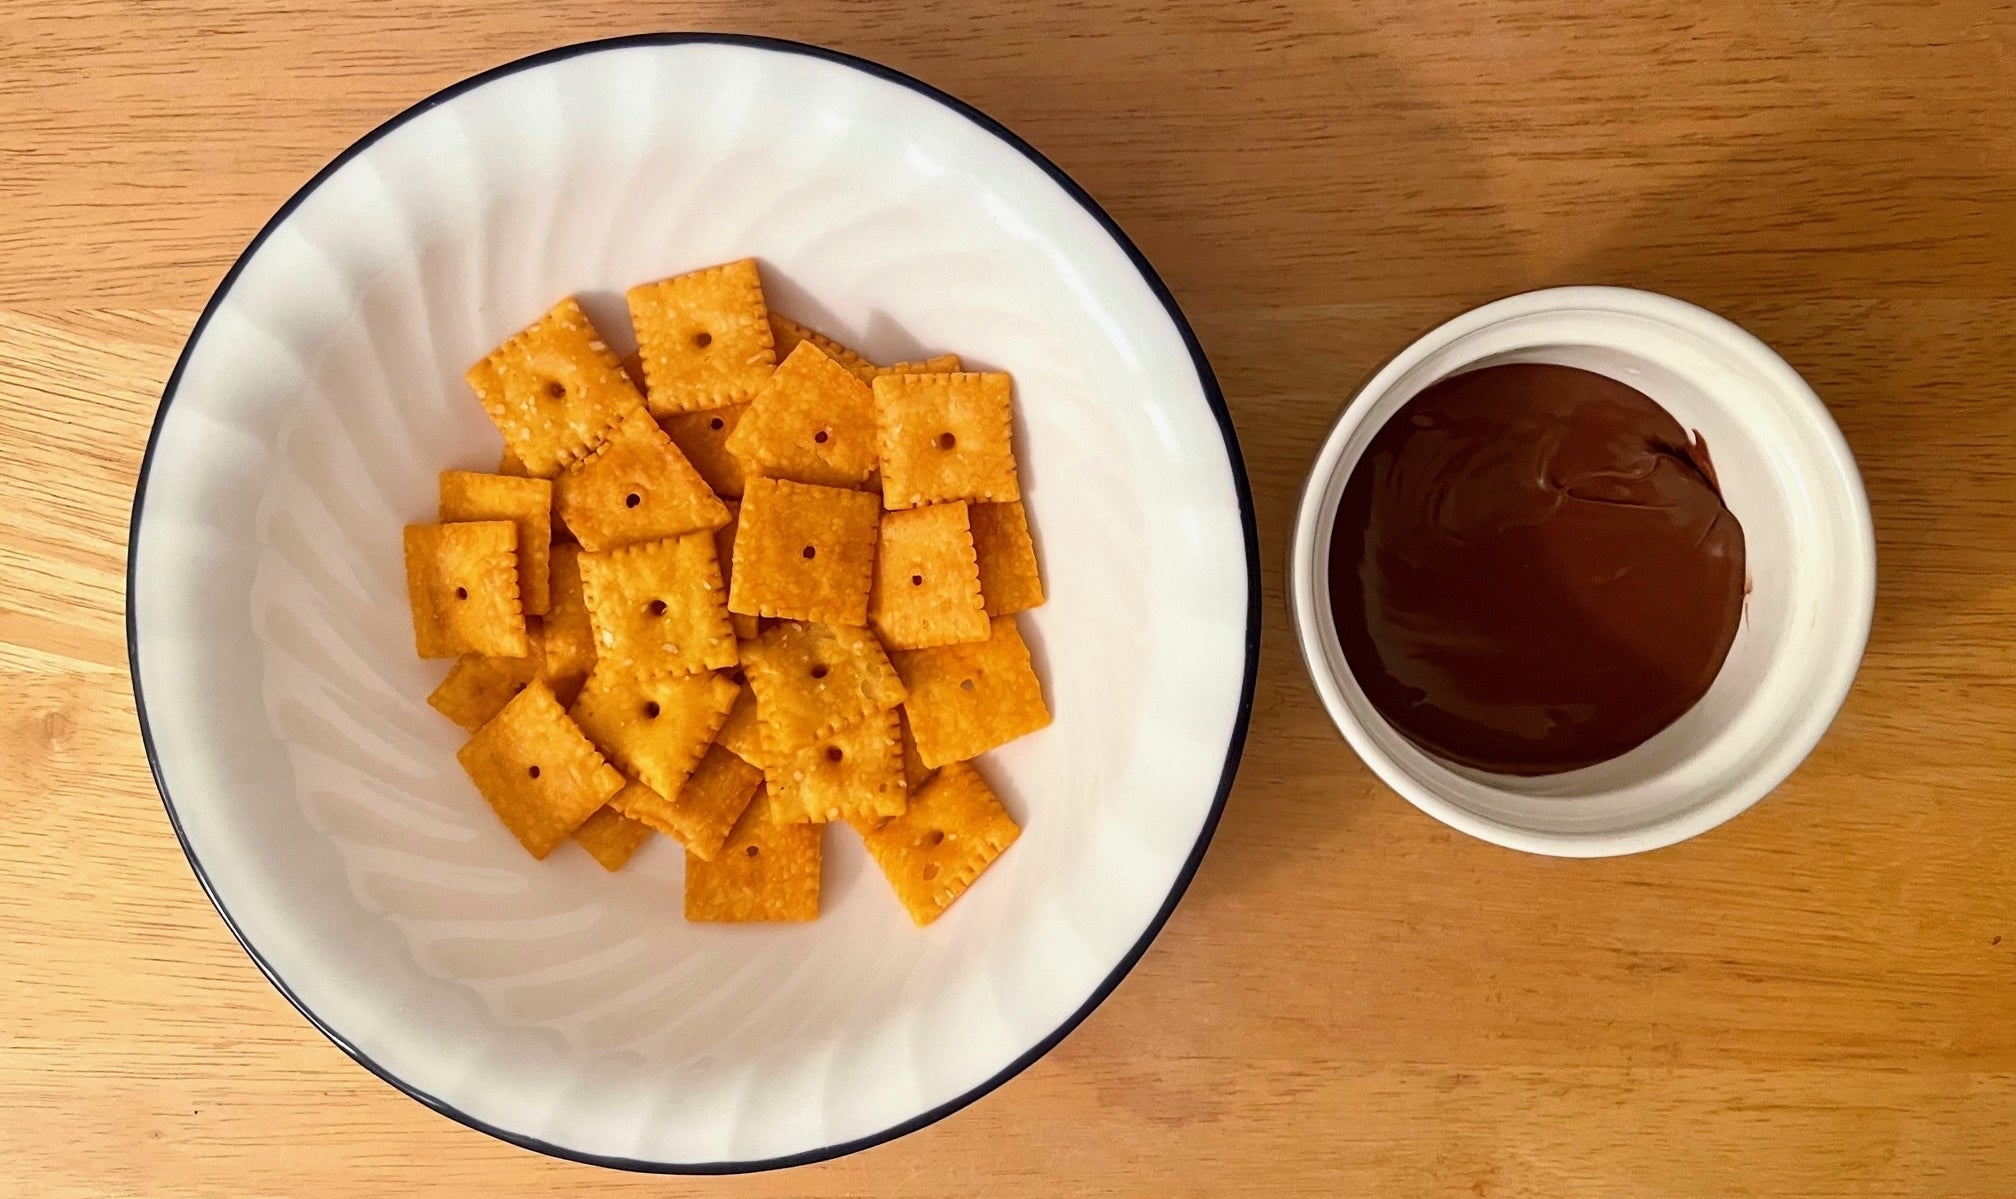 Cheez-its and Nutella